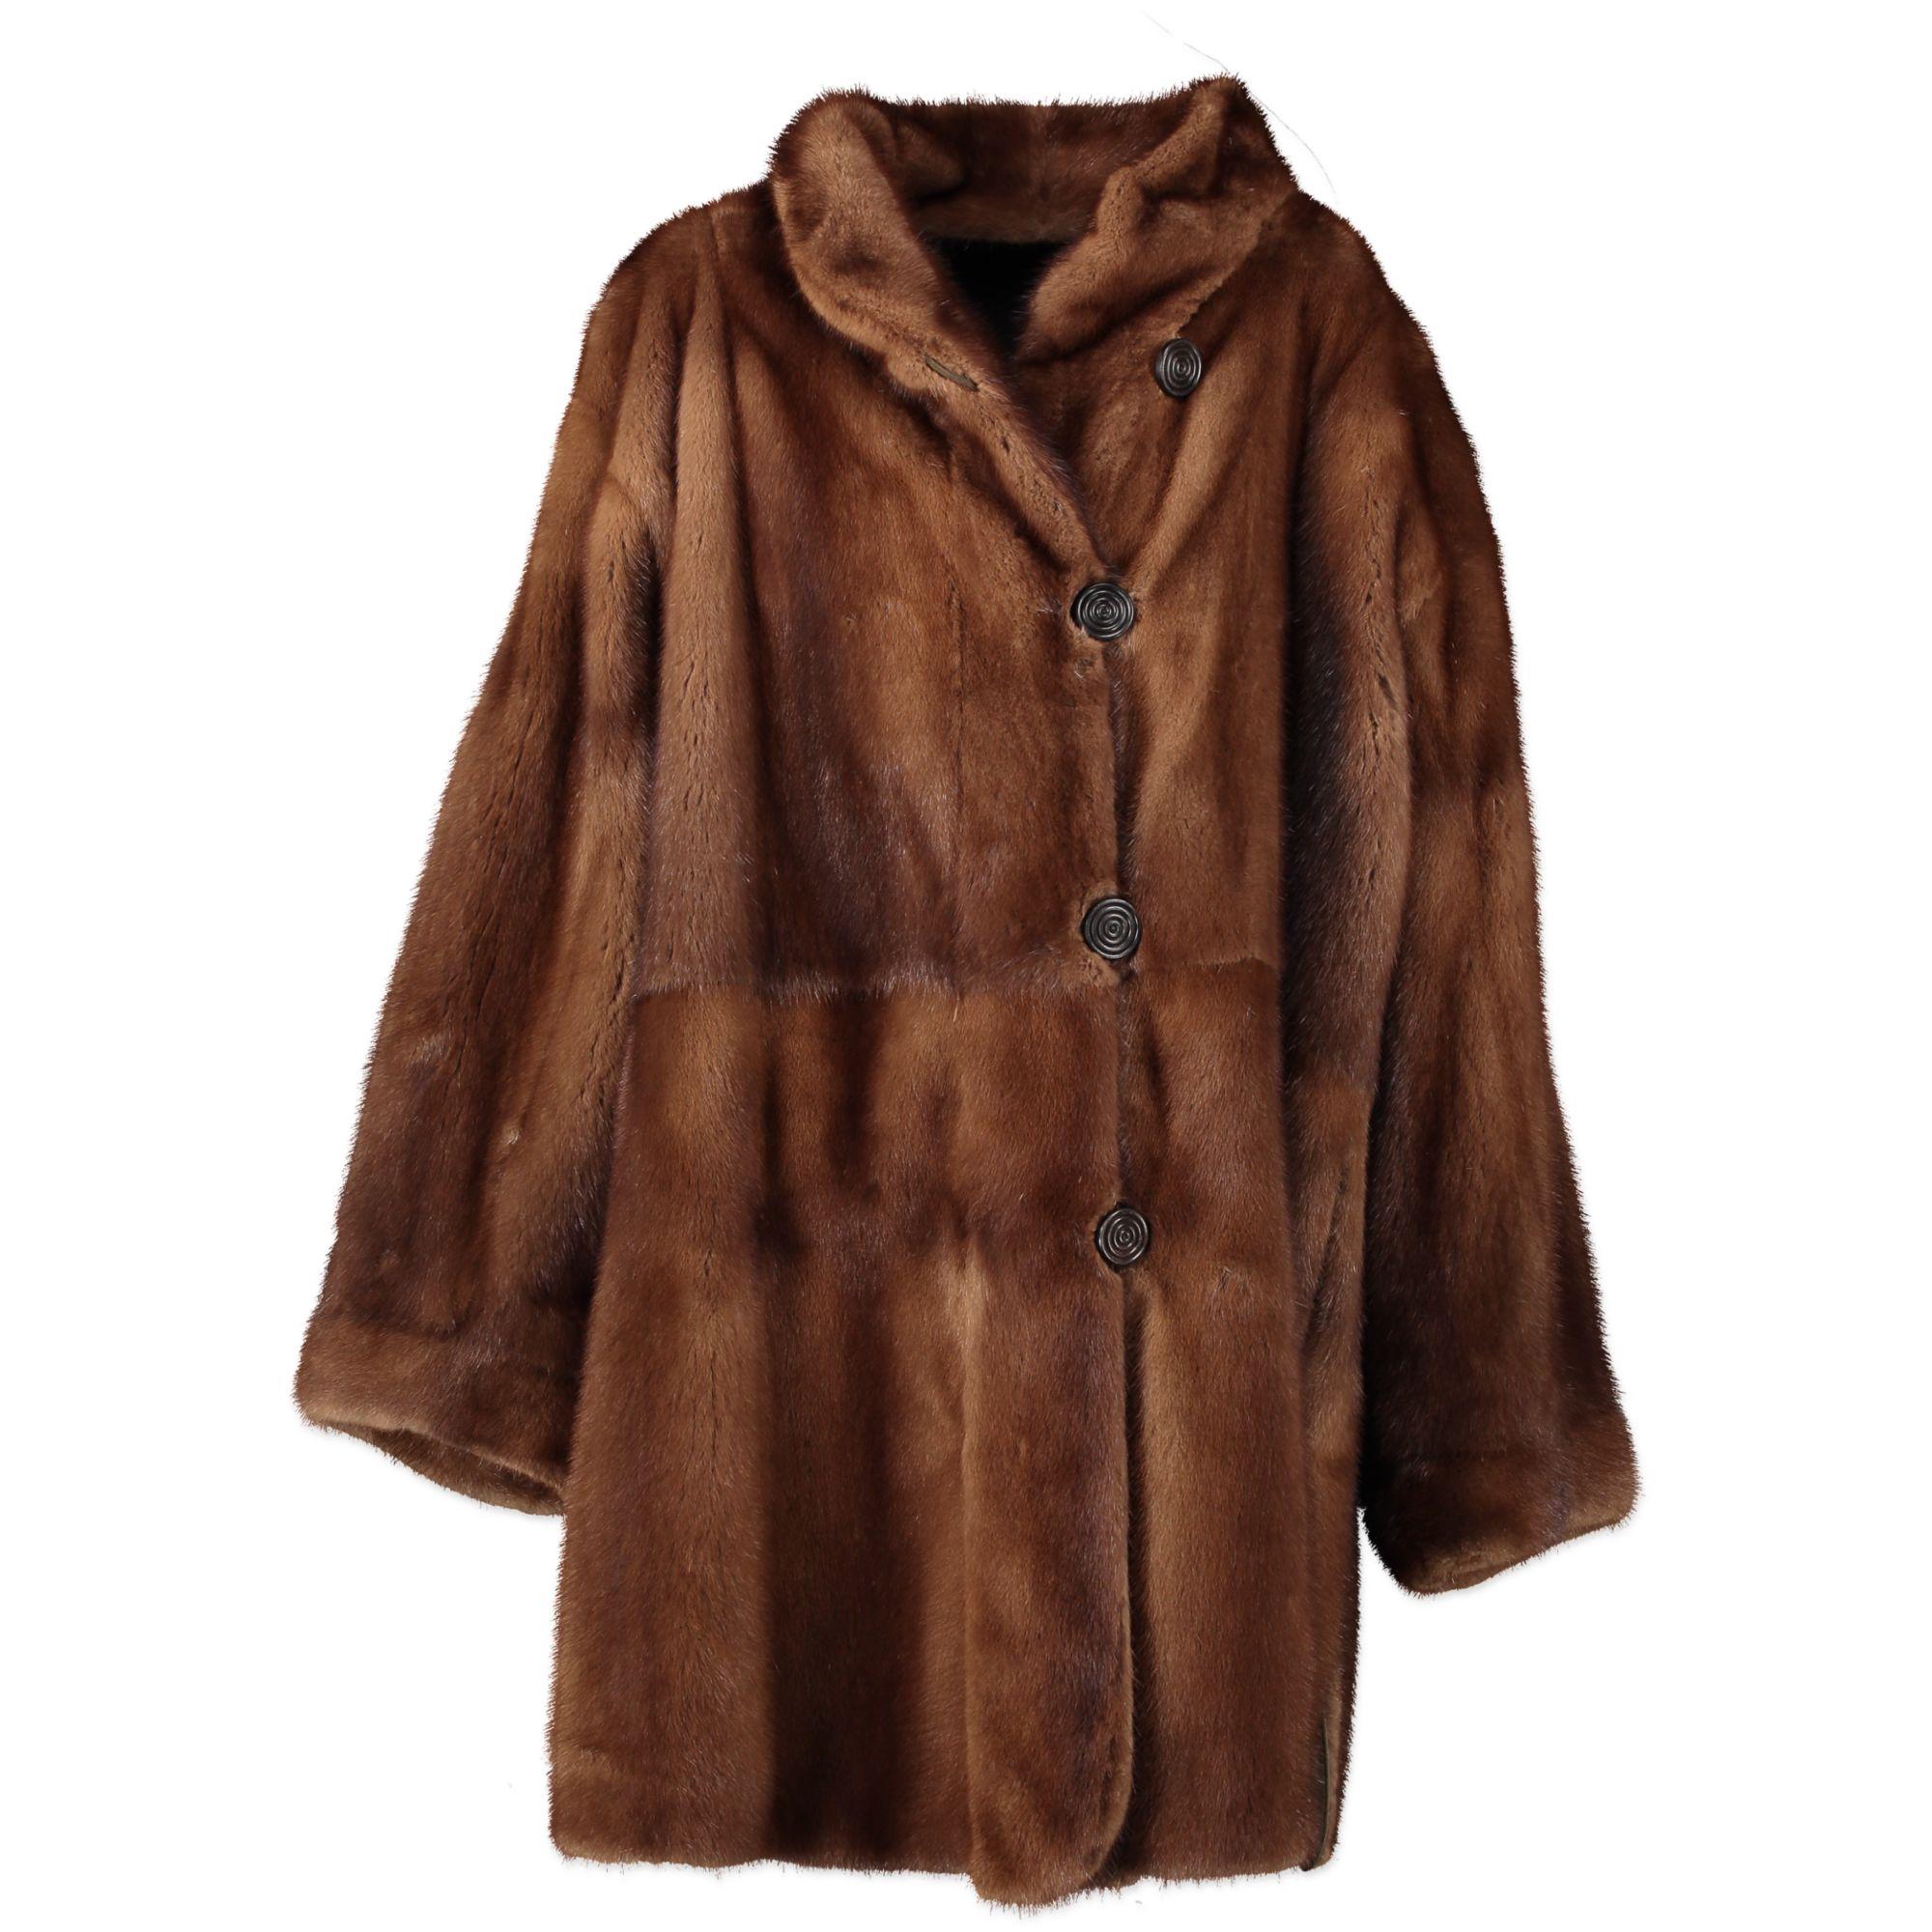 Get two coats for the price of one with this gorgeous YSL coat. This piece is versatile as ever as it can be worn on two different sides. It has a brown fur side to go for a classic style and a dark green shearling side for a more casual vibe. It